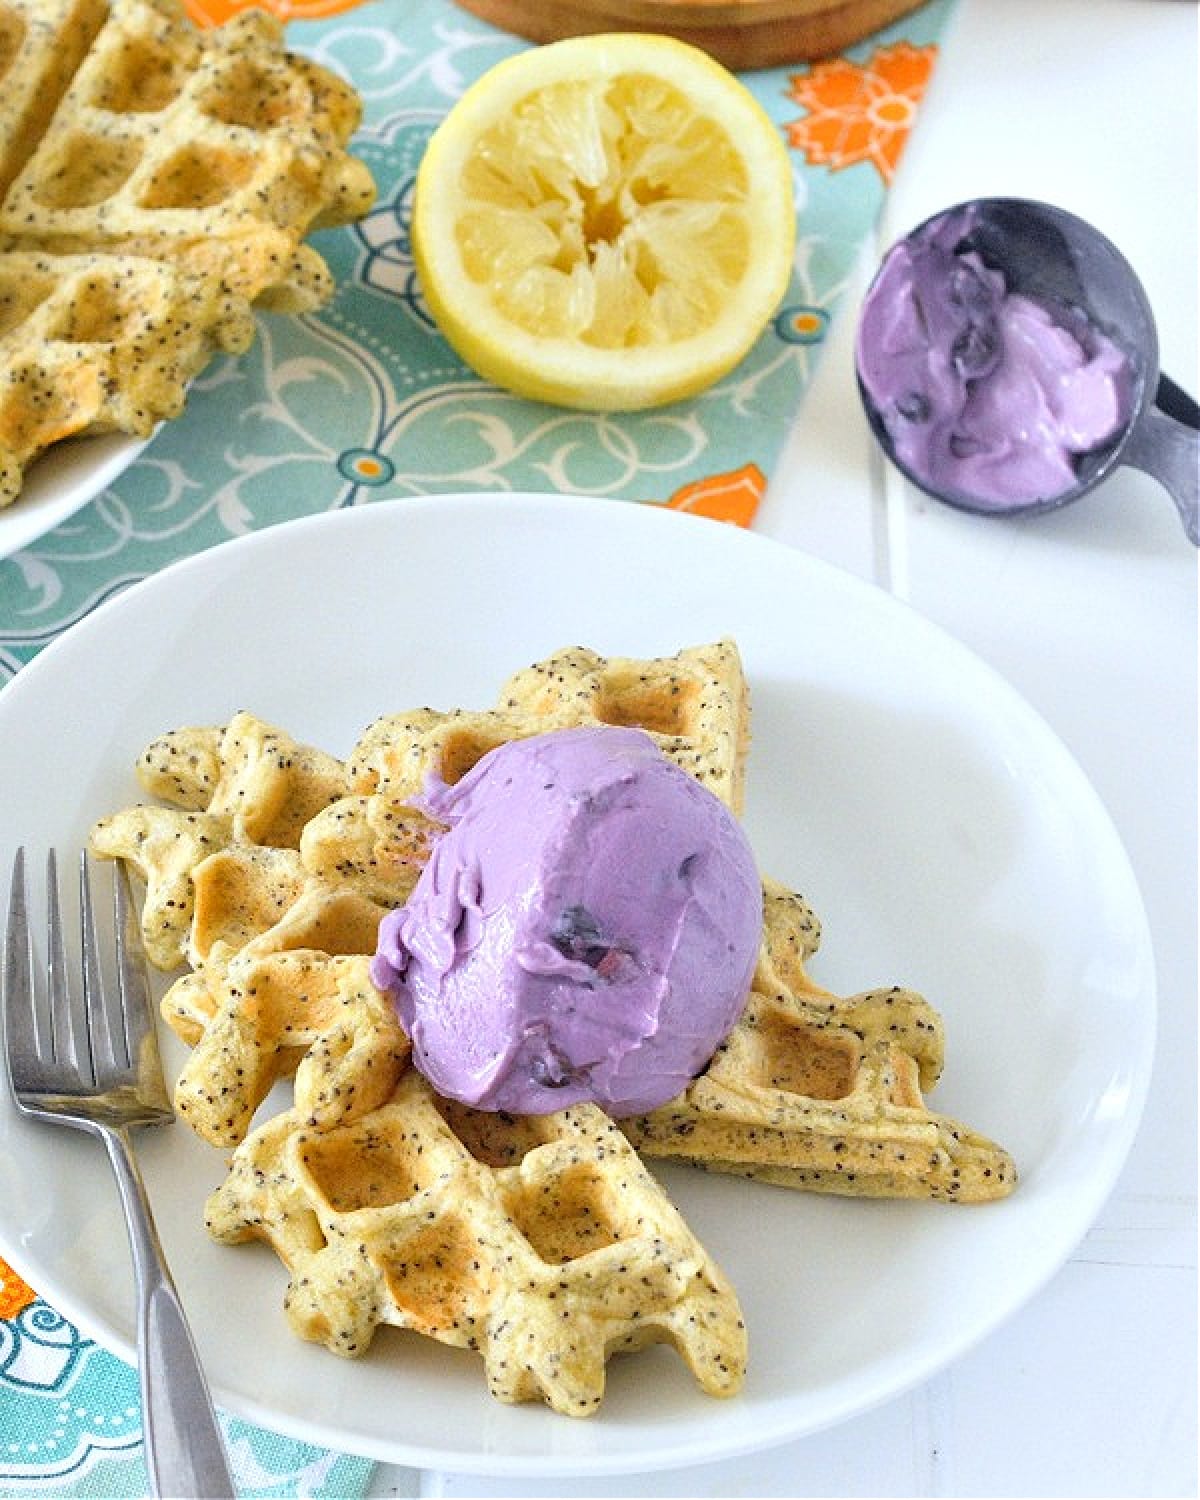 Golden yellow lemon poppyseed waffles on a white plate topped with a scoop of light purple blueberry yogurt. A fresh squeezed lemon half sits next to another white plate holding 2 more full Belgian style waffles, and an ice cream scoop with purple yogurt in it.